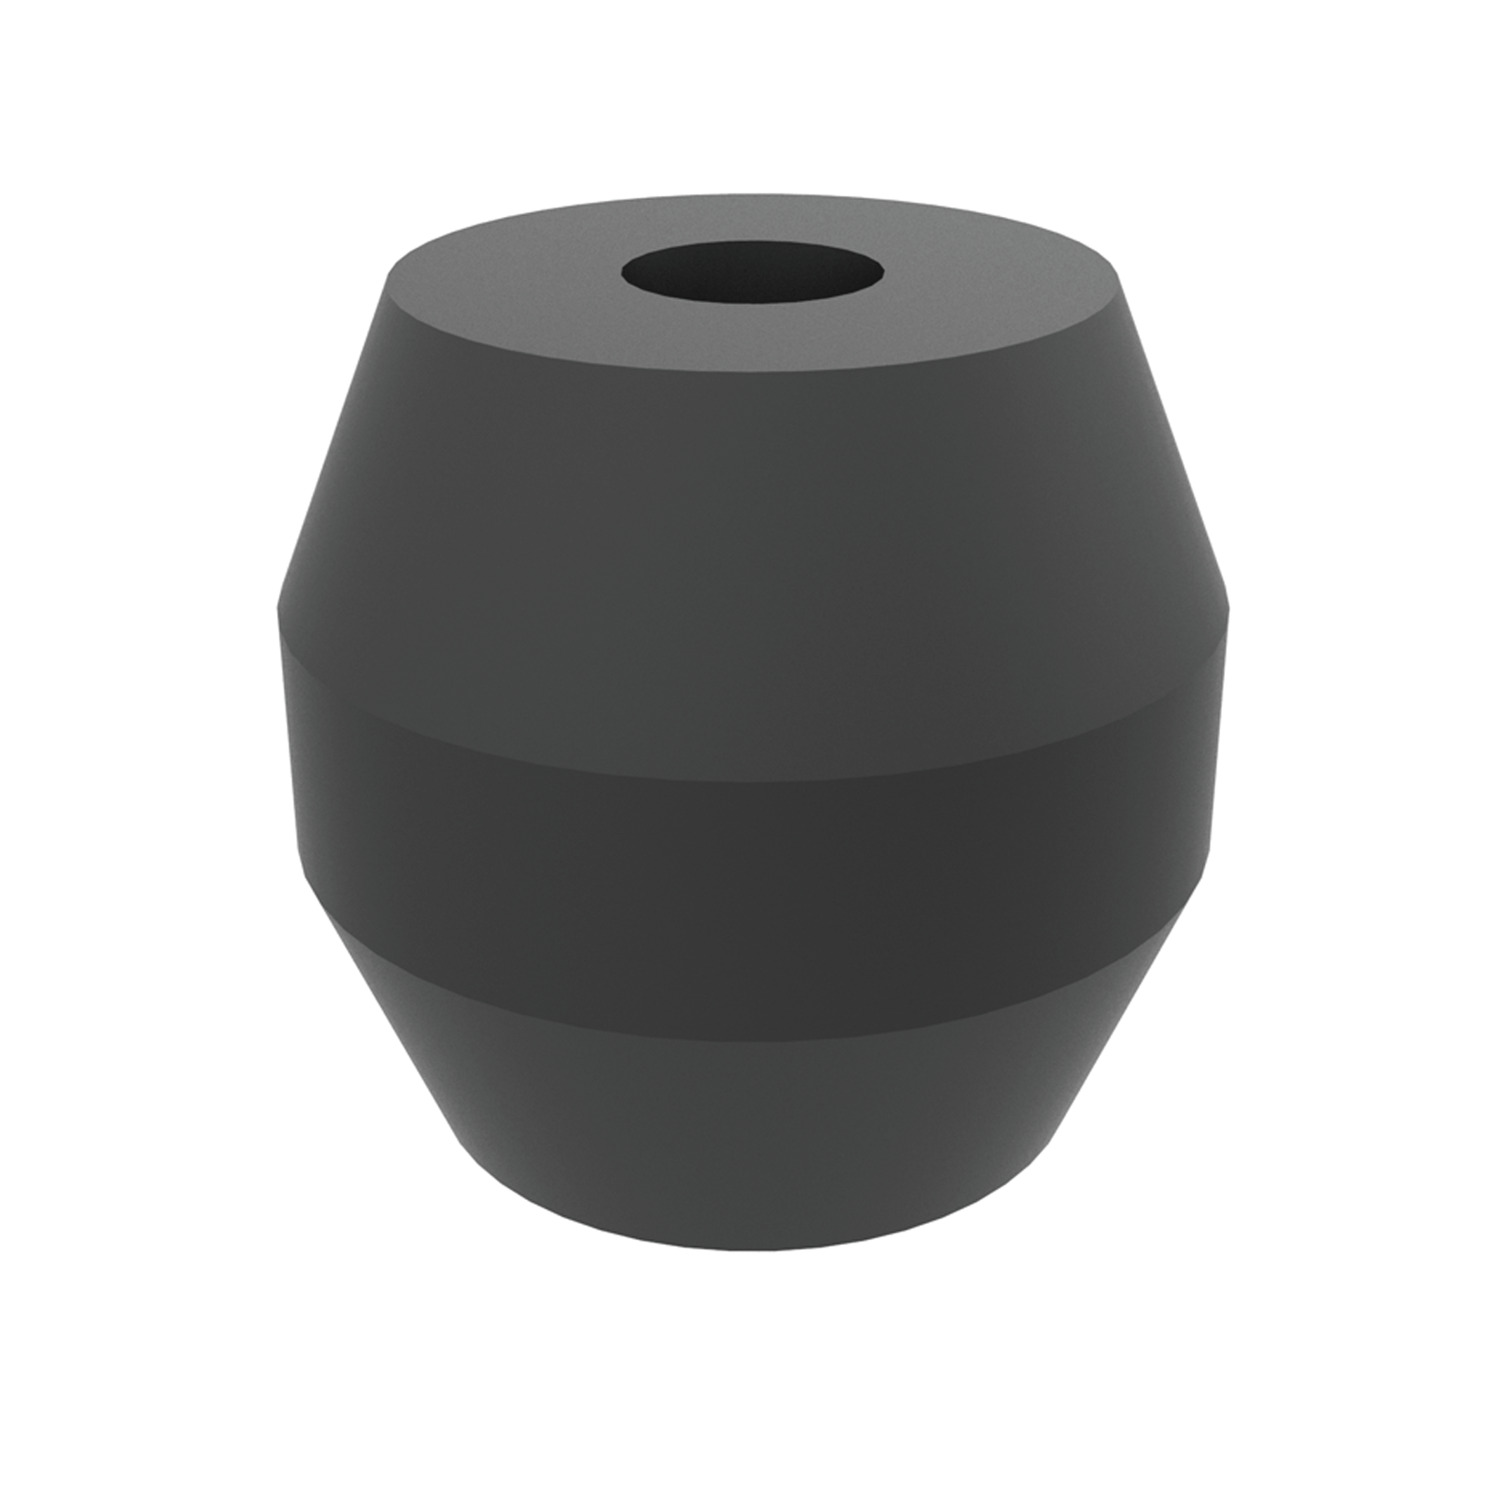 Anti-vibration Bushes Allows high deformation with excellent spring back characteristics.